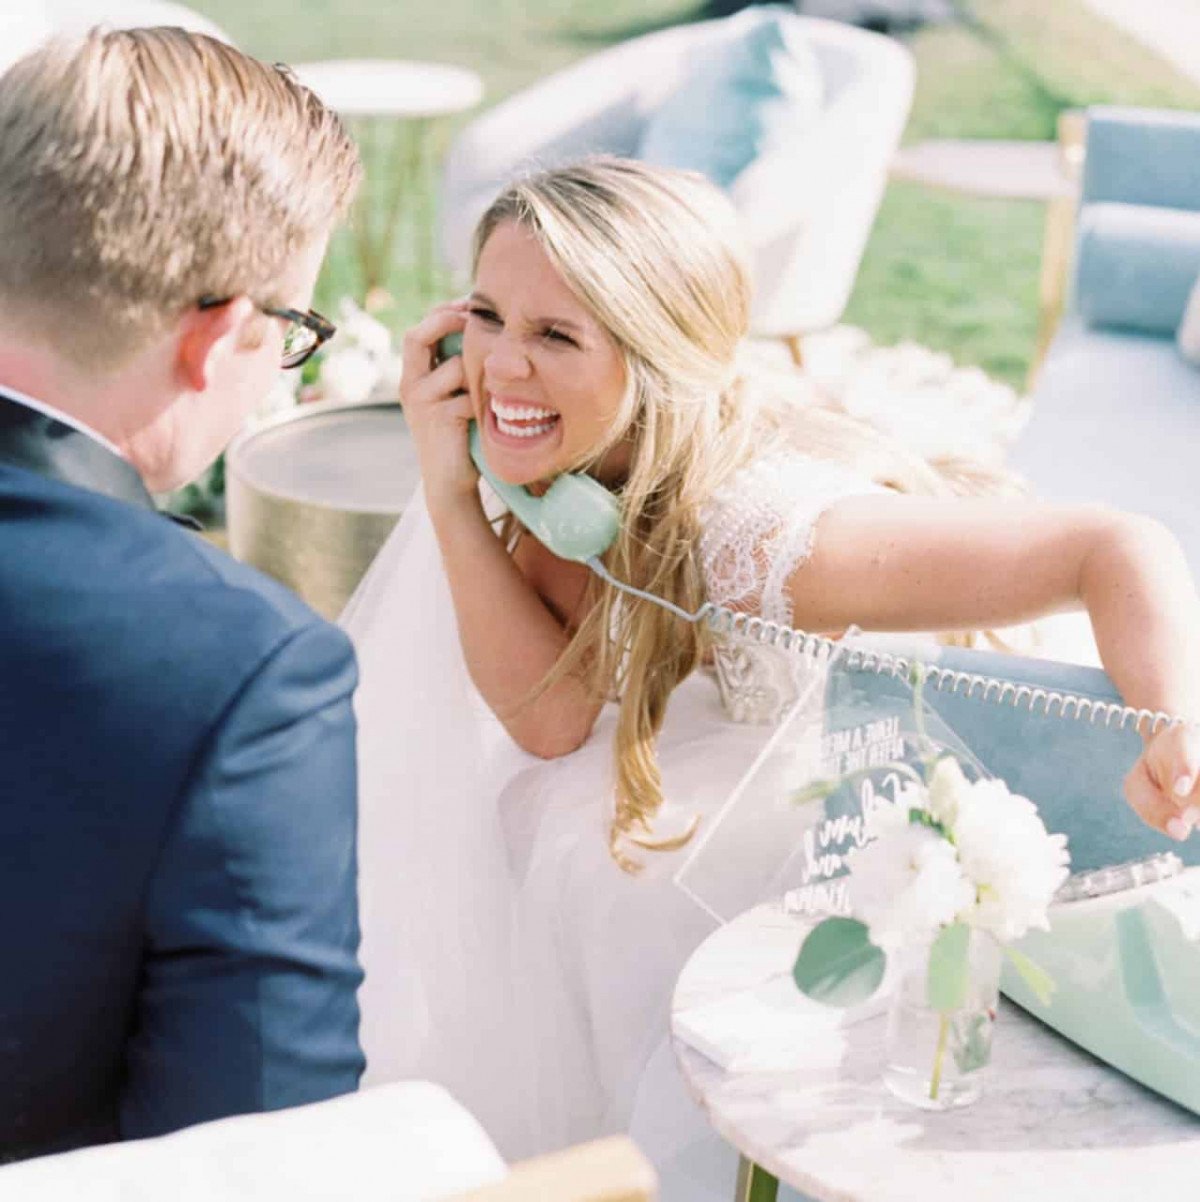 bride giggling while listening to audio guest book for weddings messages